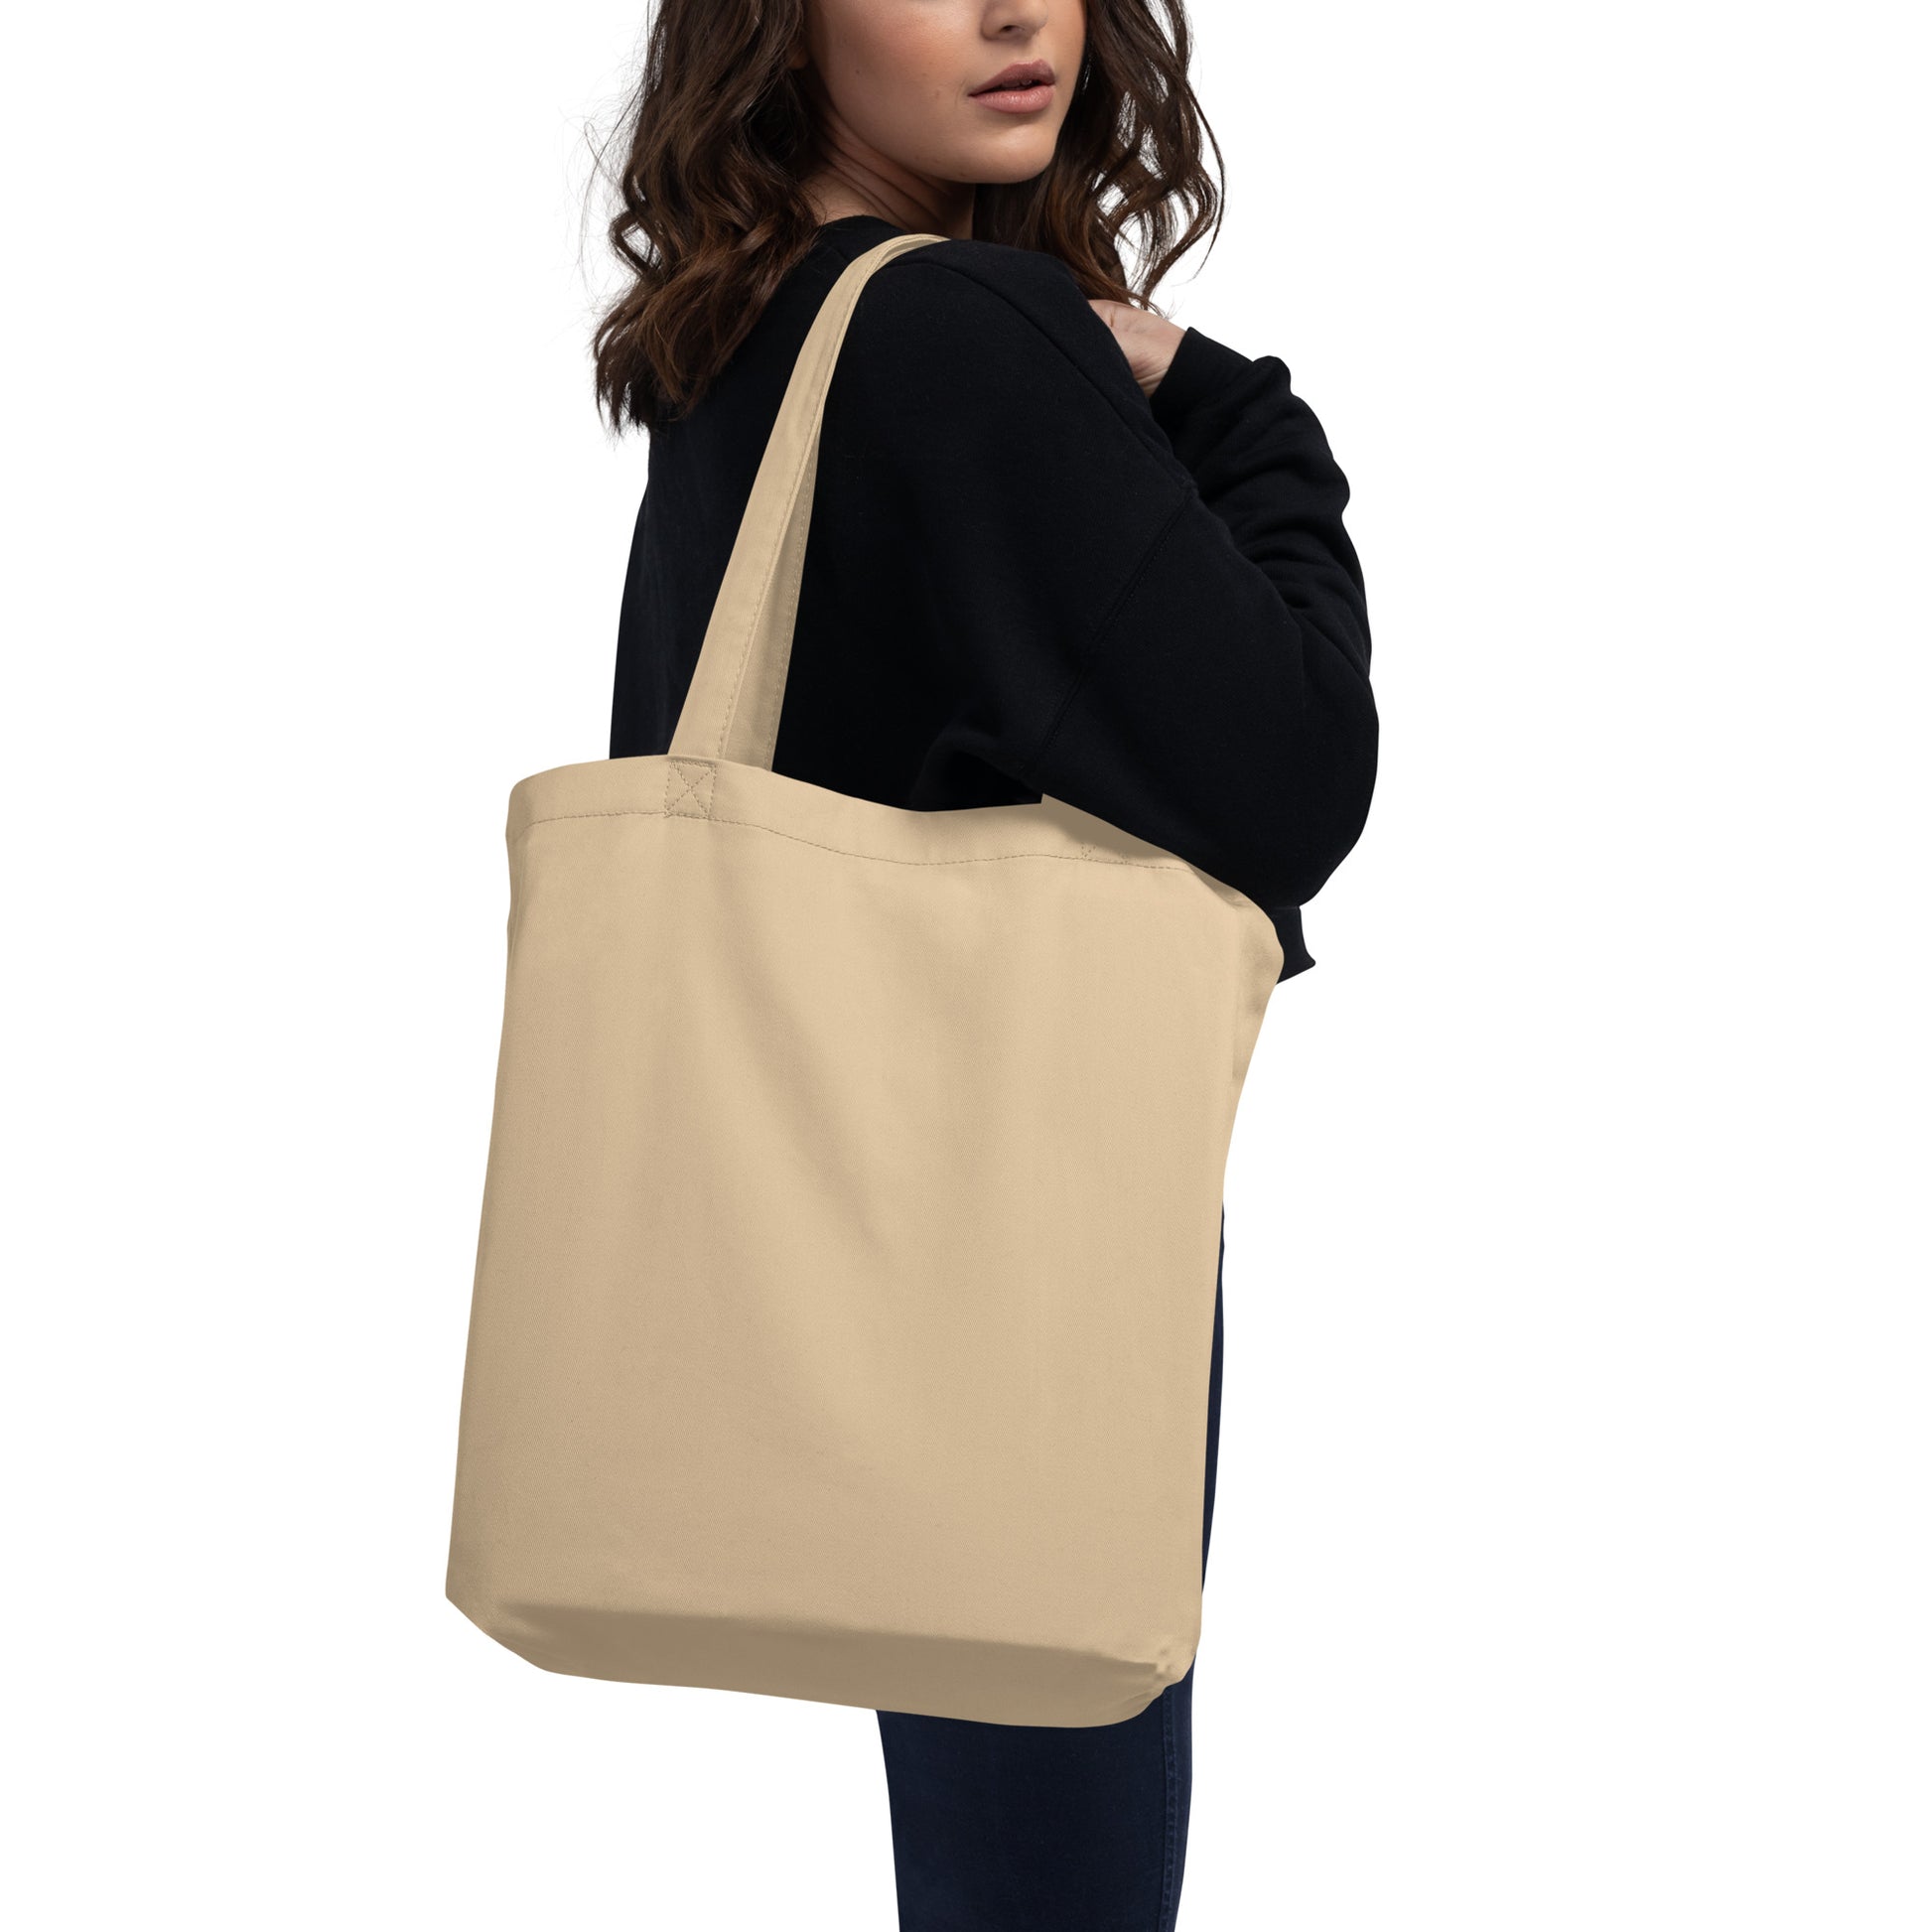 Aviation Gift Organic Tote - Black • EZE Buenos Aires • YHM Designs - Image 06